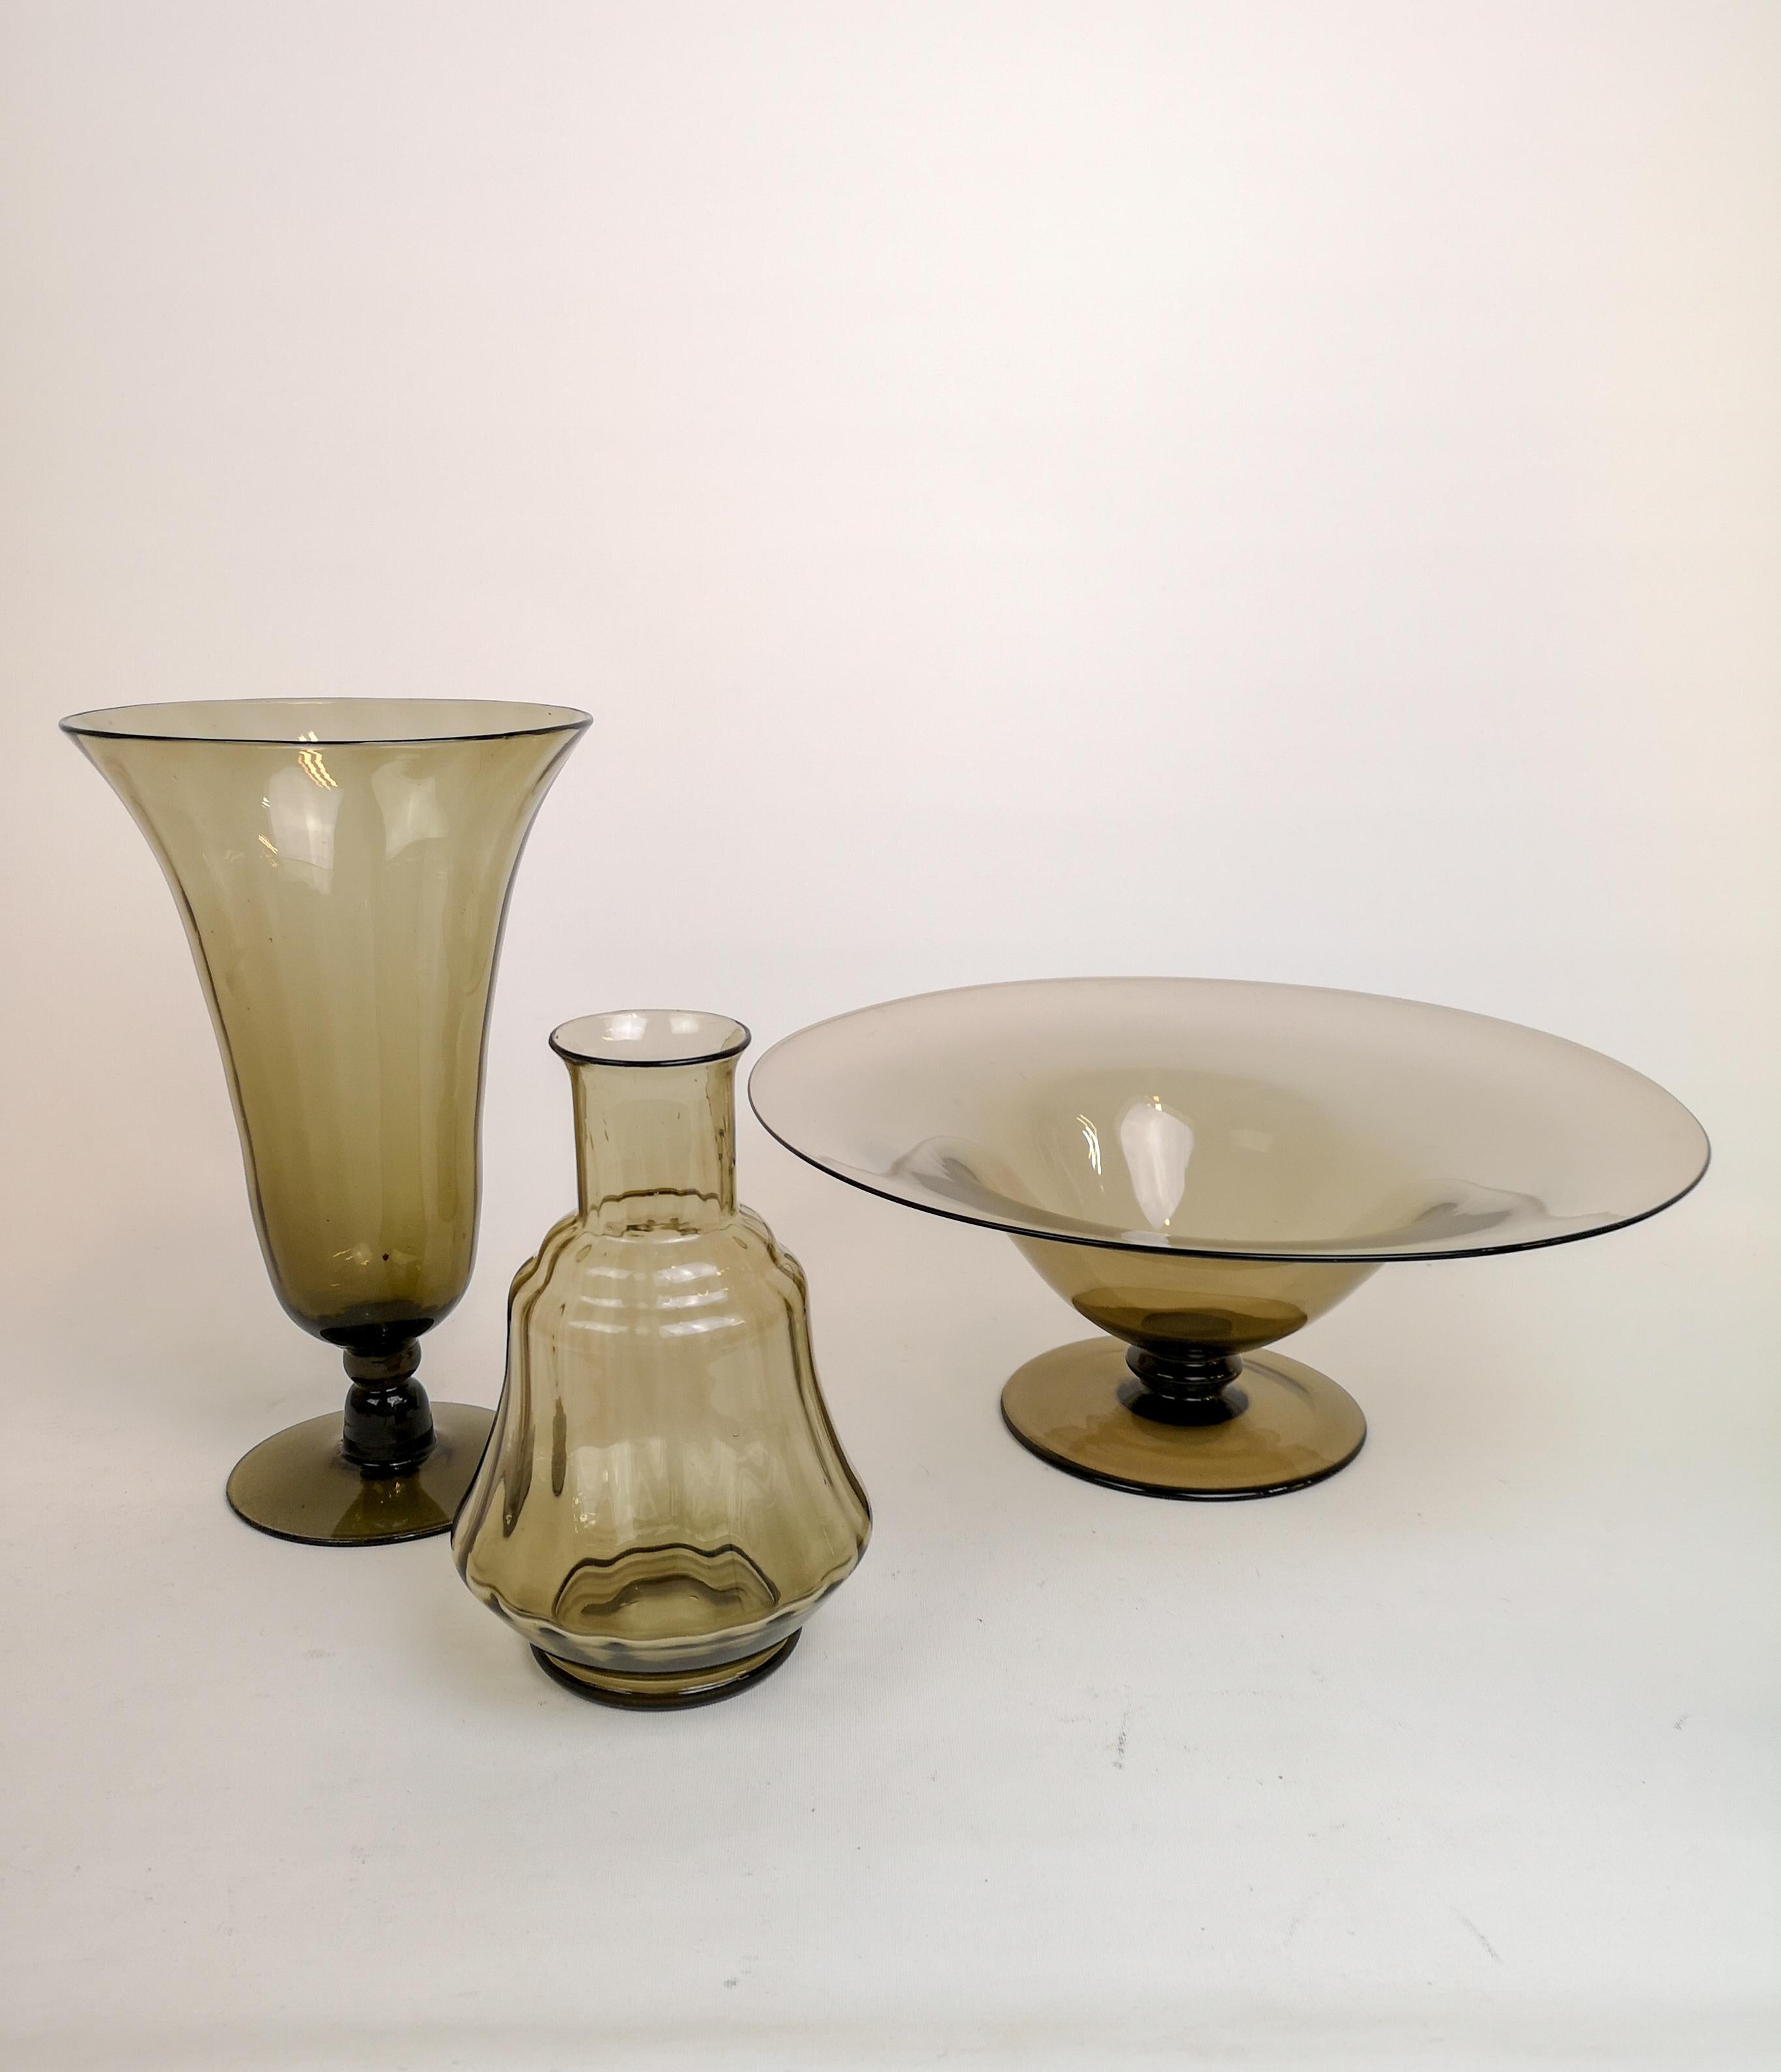 This pieces where made at Orrefors Sandvik and designed by Simon Gate in the 1920s-1930s Sweden.
The have light brown tone in the glass. Wonderful shapes and lines. 

Good vintage condition. 

Measures: Large vase H 26 cm, D 15 cm, small vase H